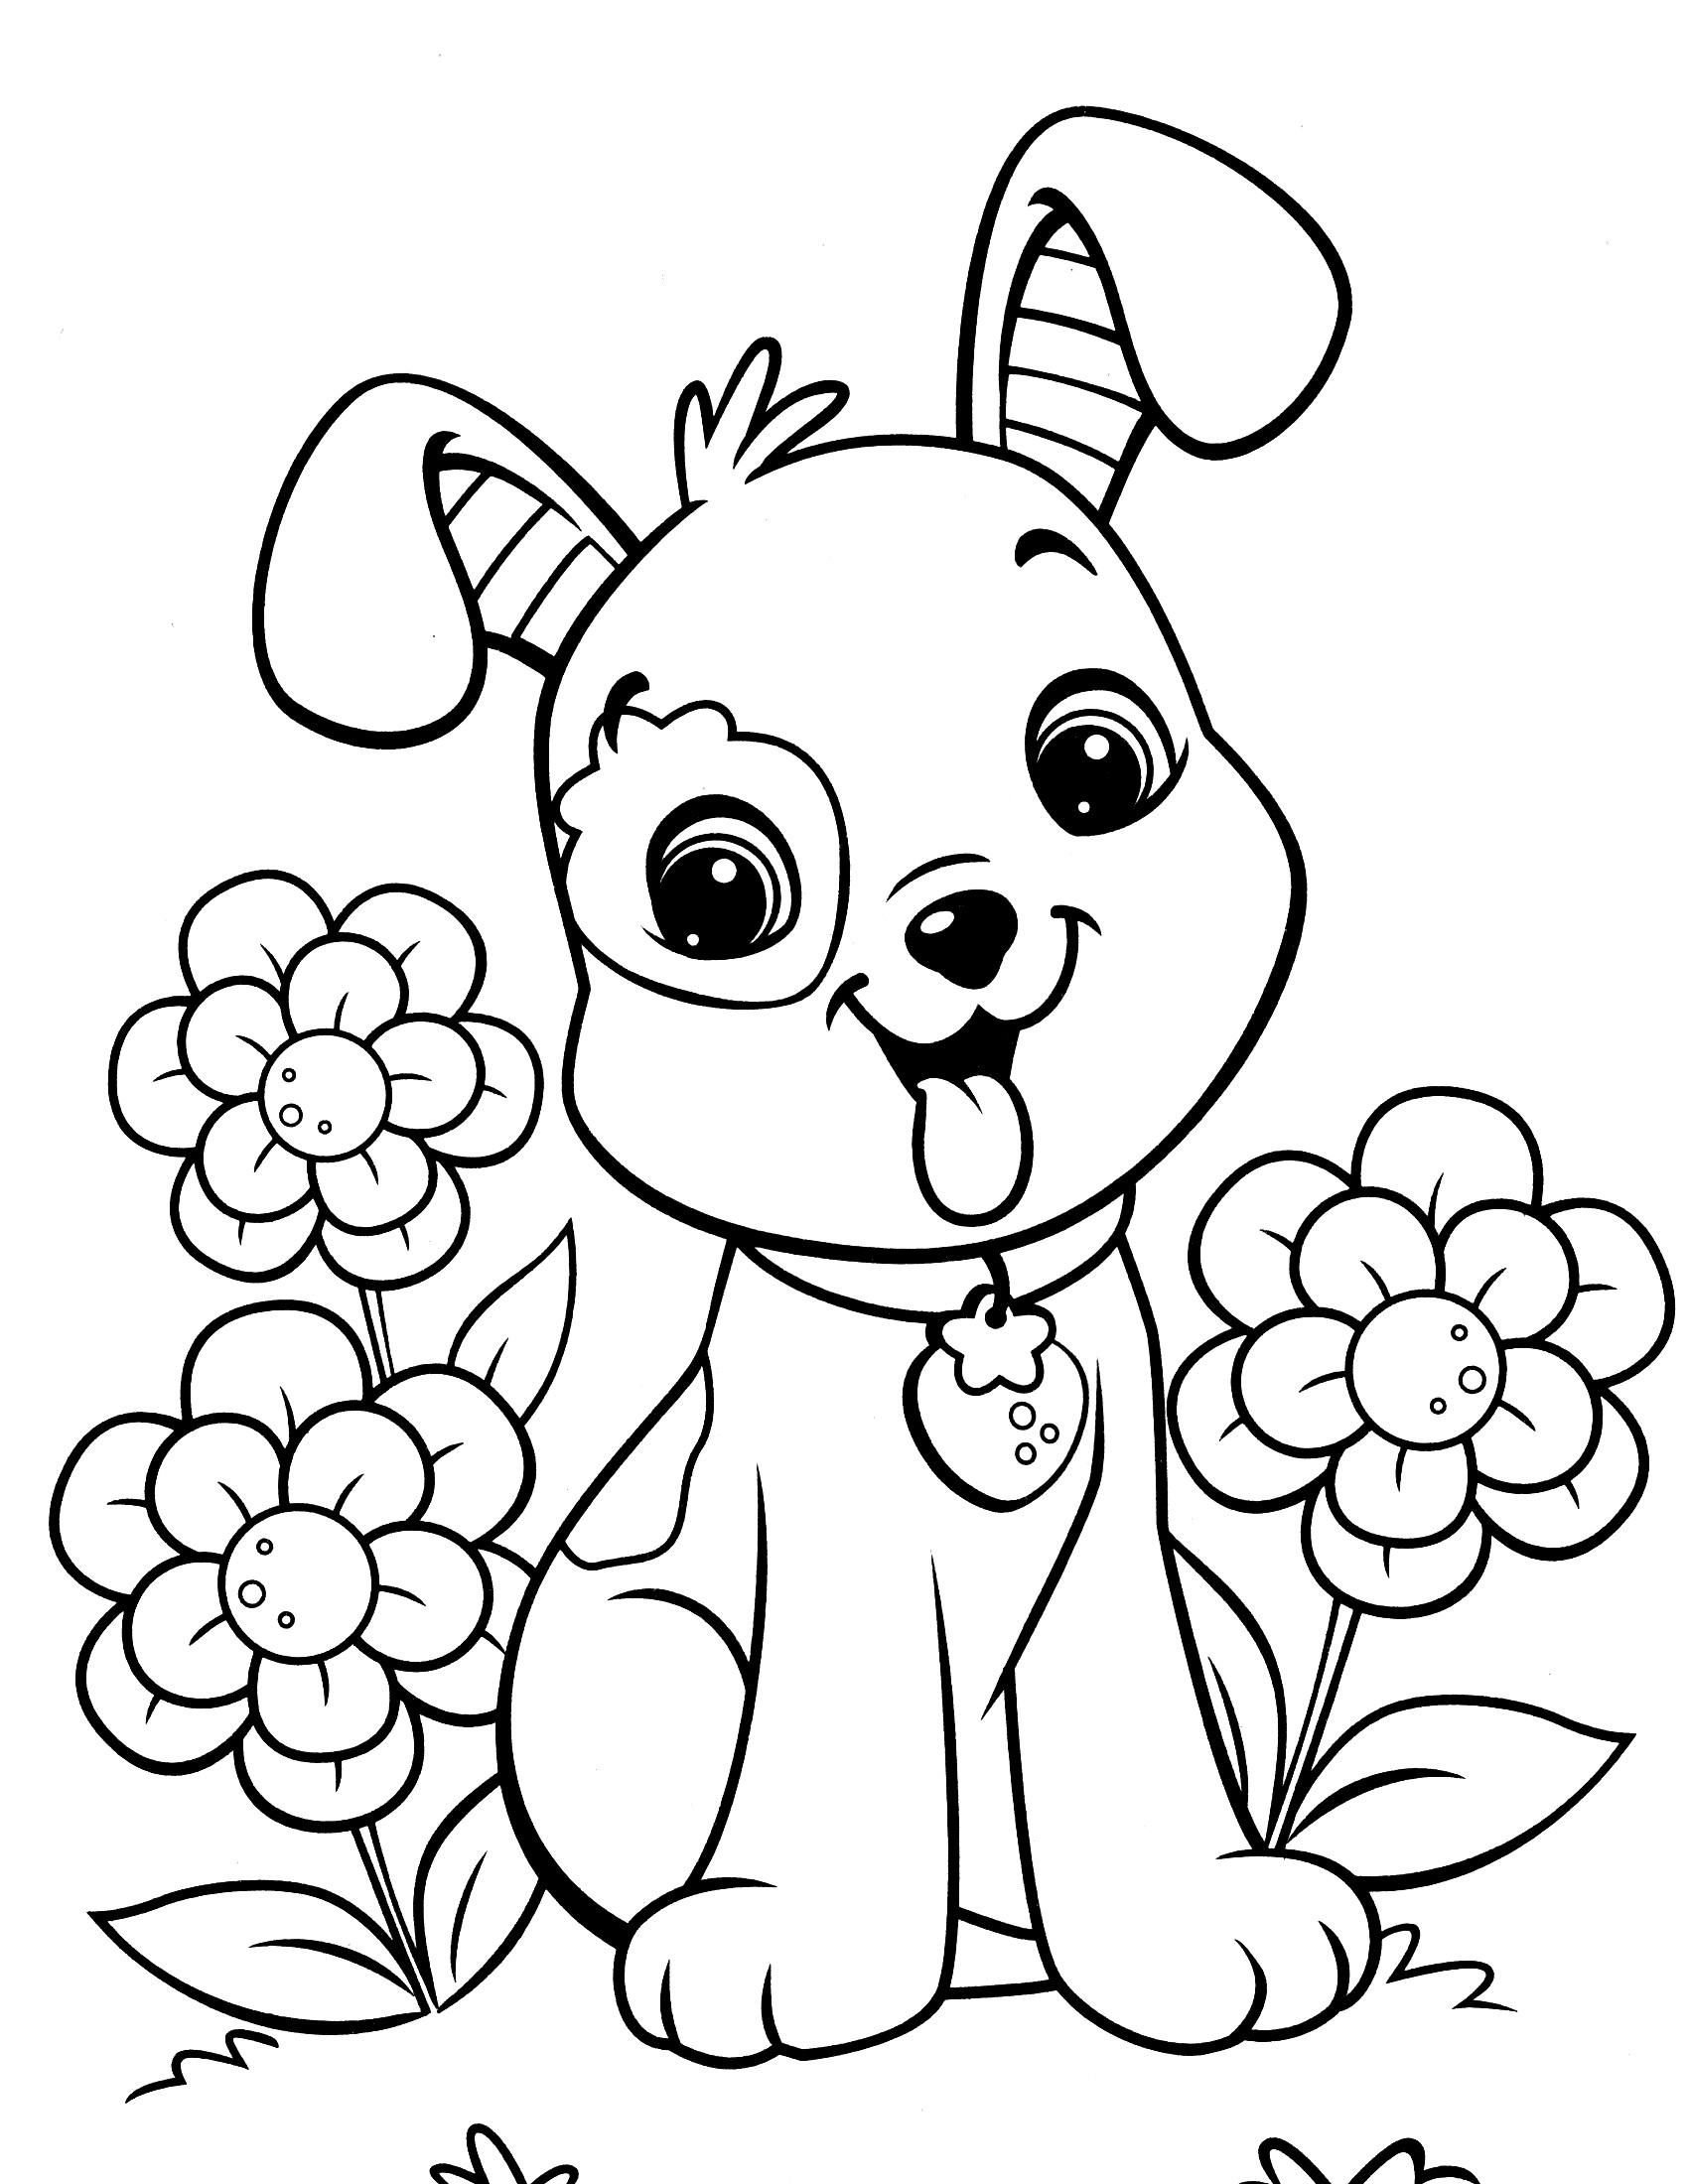 Free Printable Puppy Coloring Pages
 Puppy Coloring Pages Best Coloring Pages For Kids